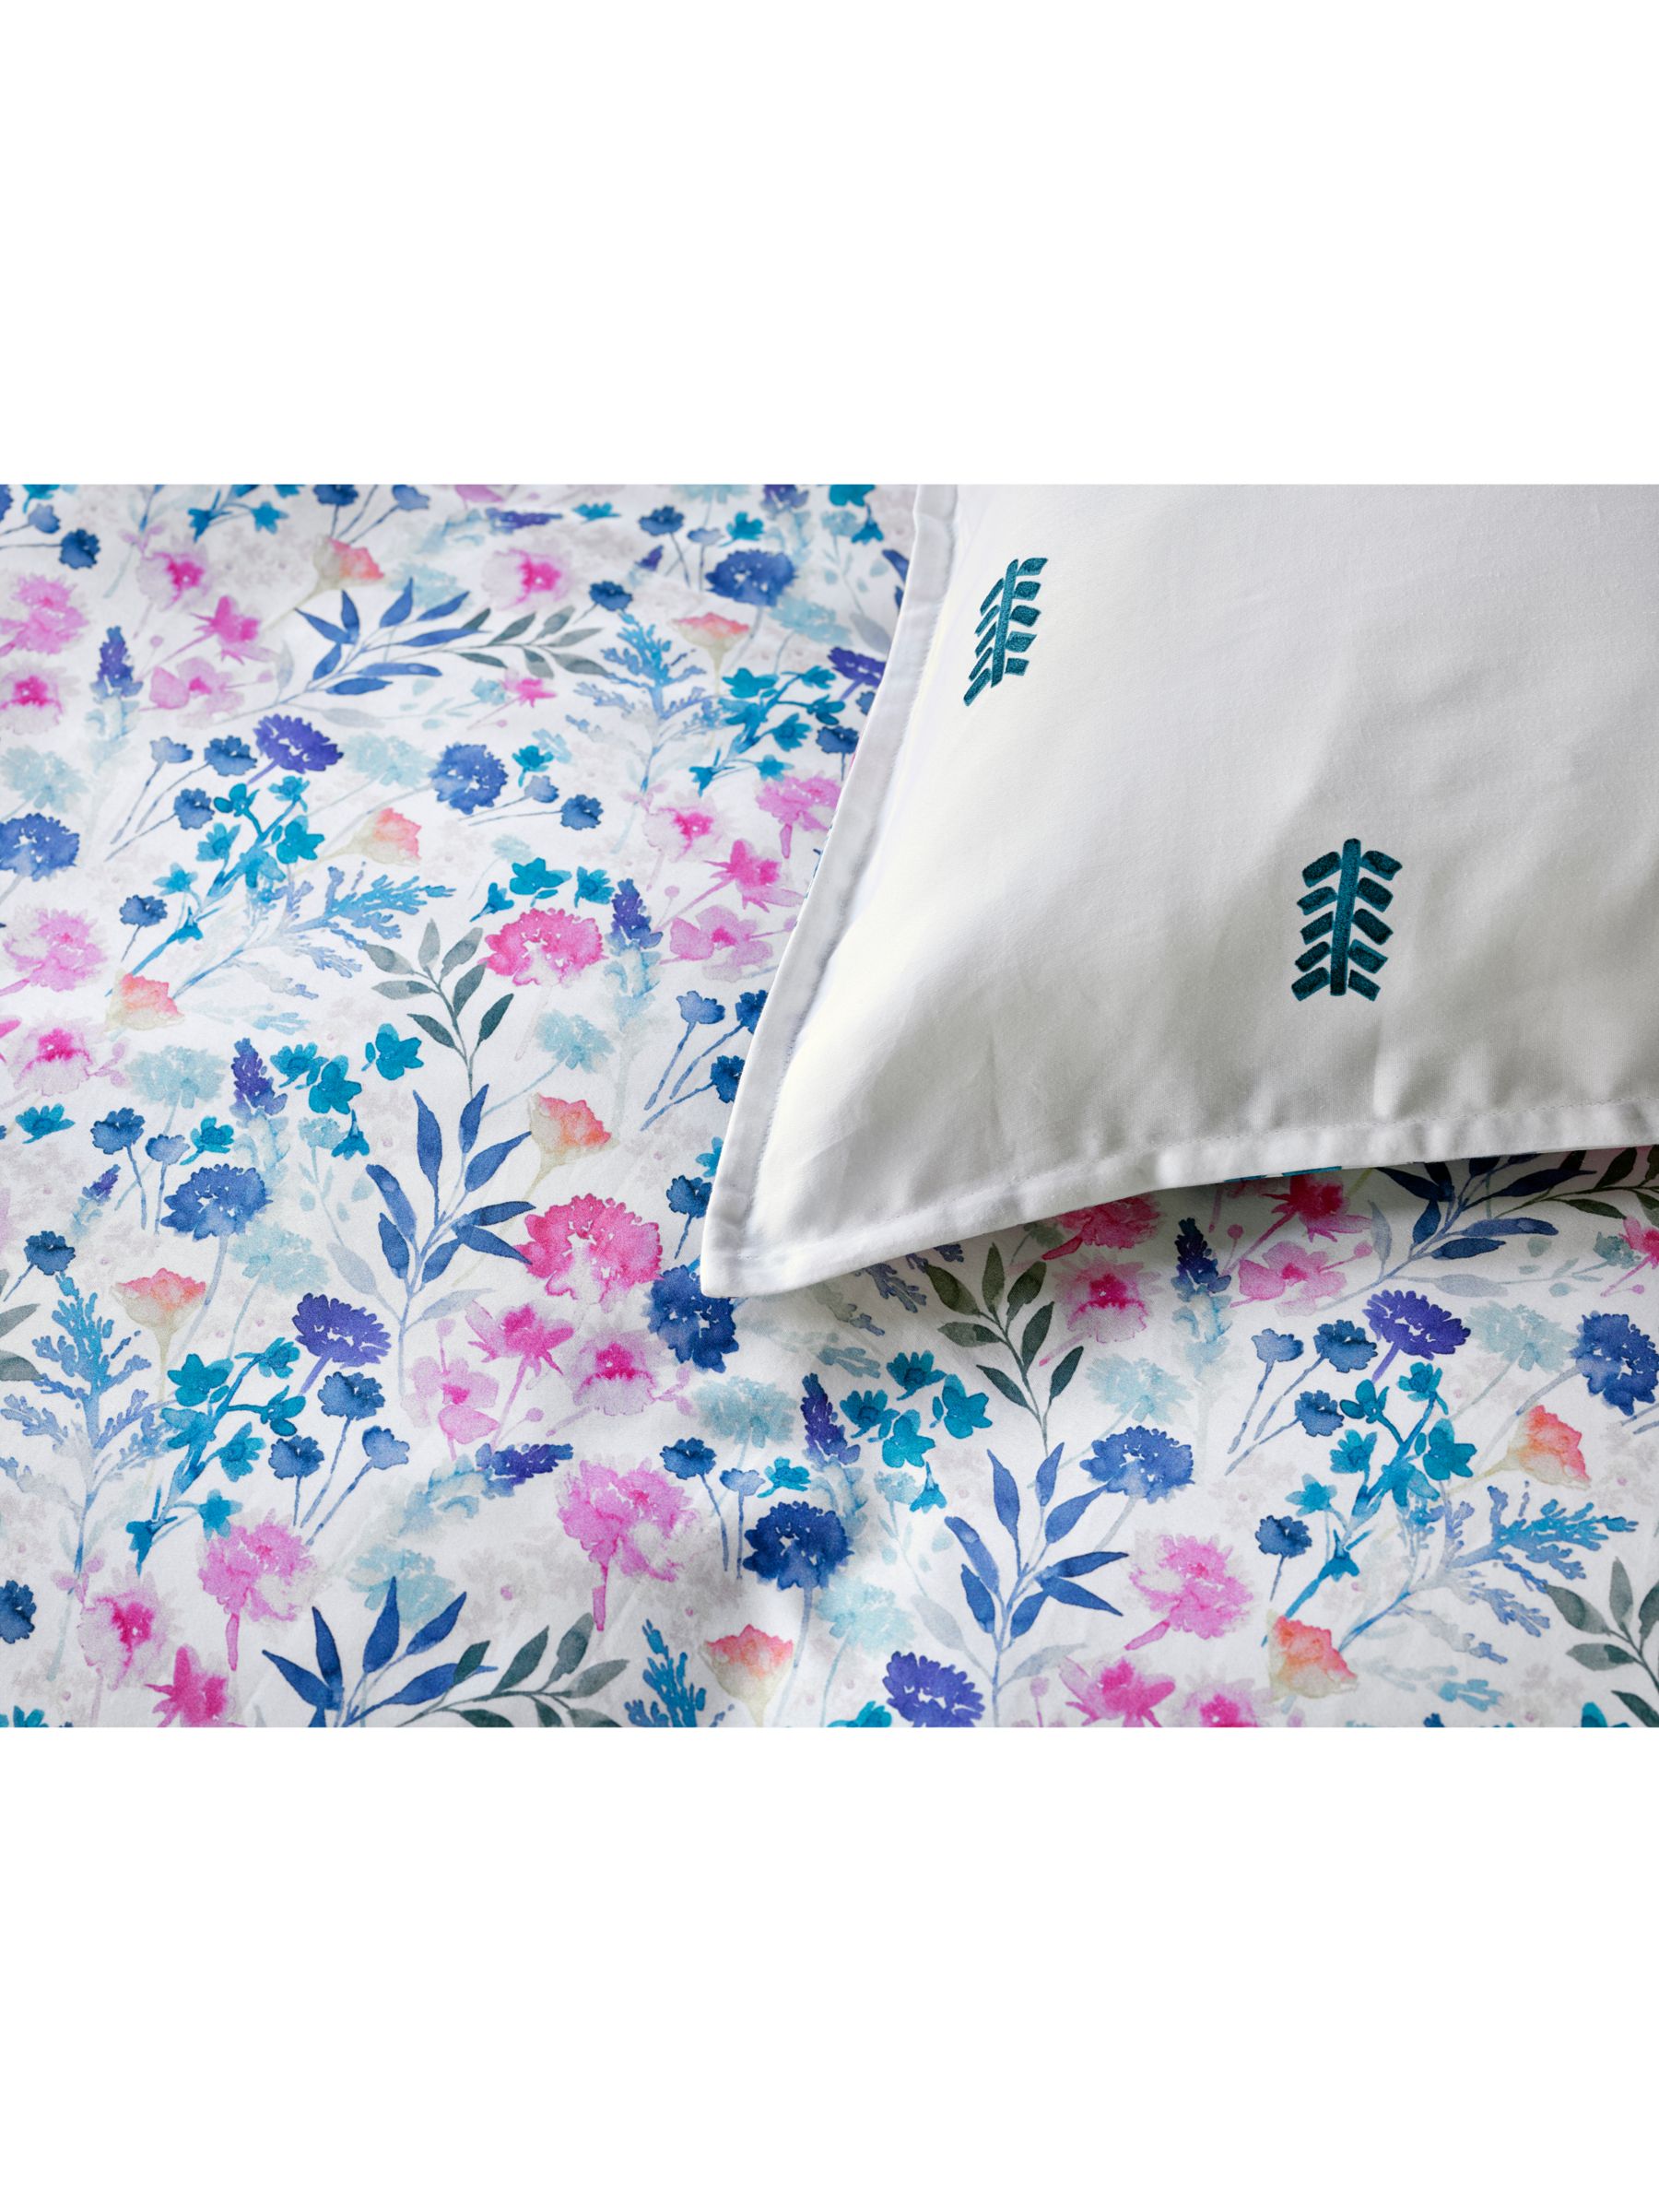 Bluebellgray Wee Peggy Duvet Cover Set At John Lewis Partners